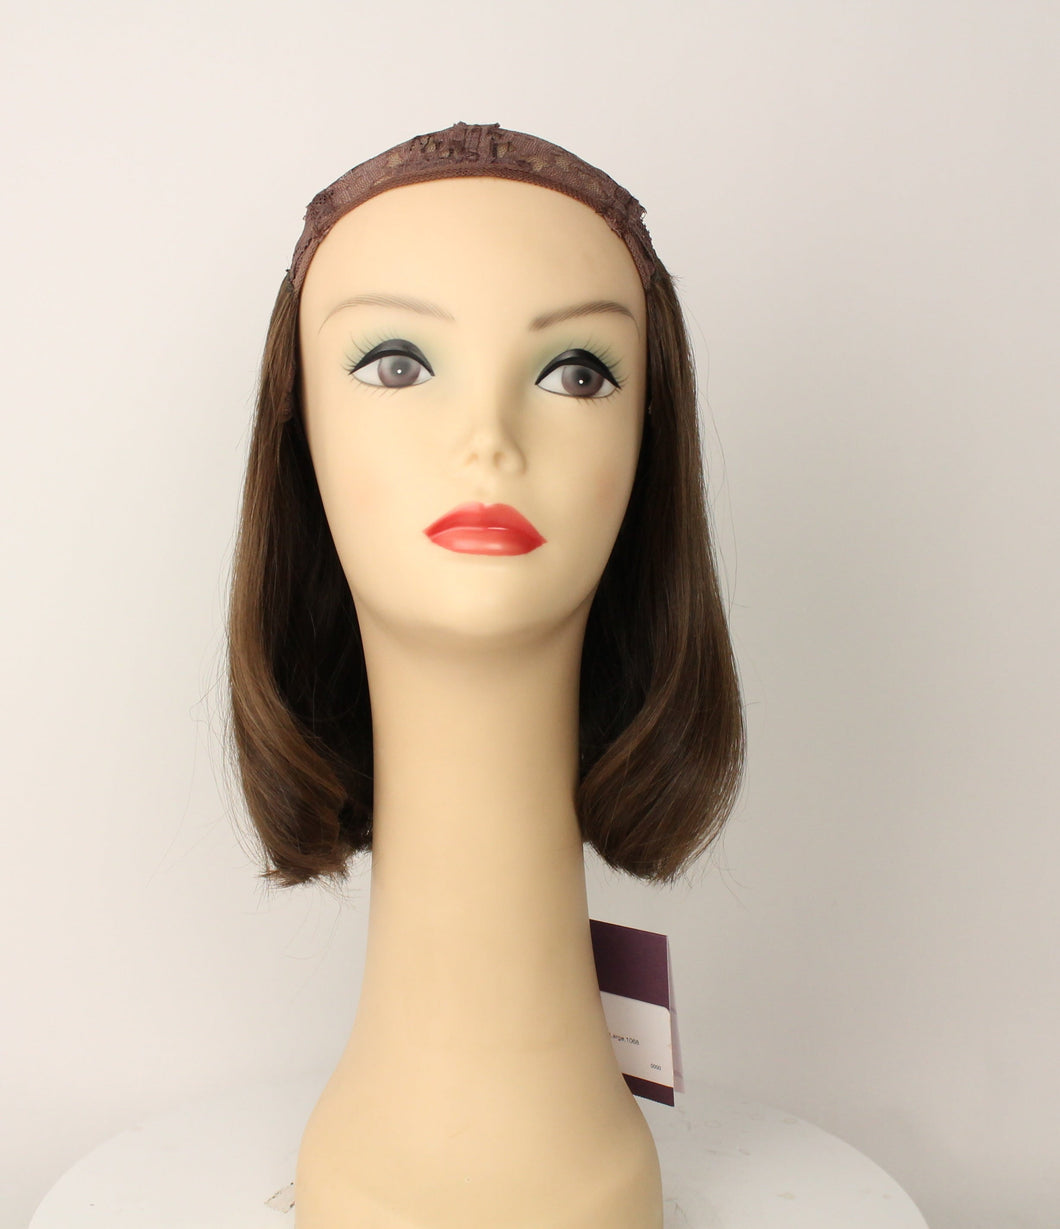 Hat Fall Avalon Light Brown With Blended Lowlights And Highlights Size X-L 11''